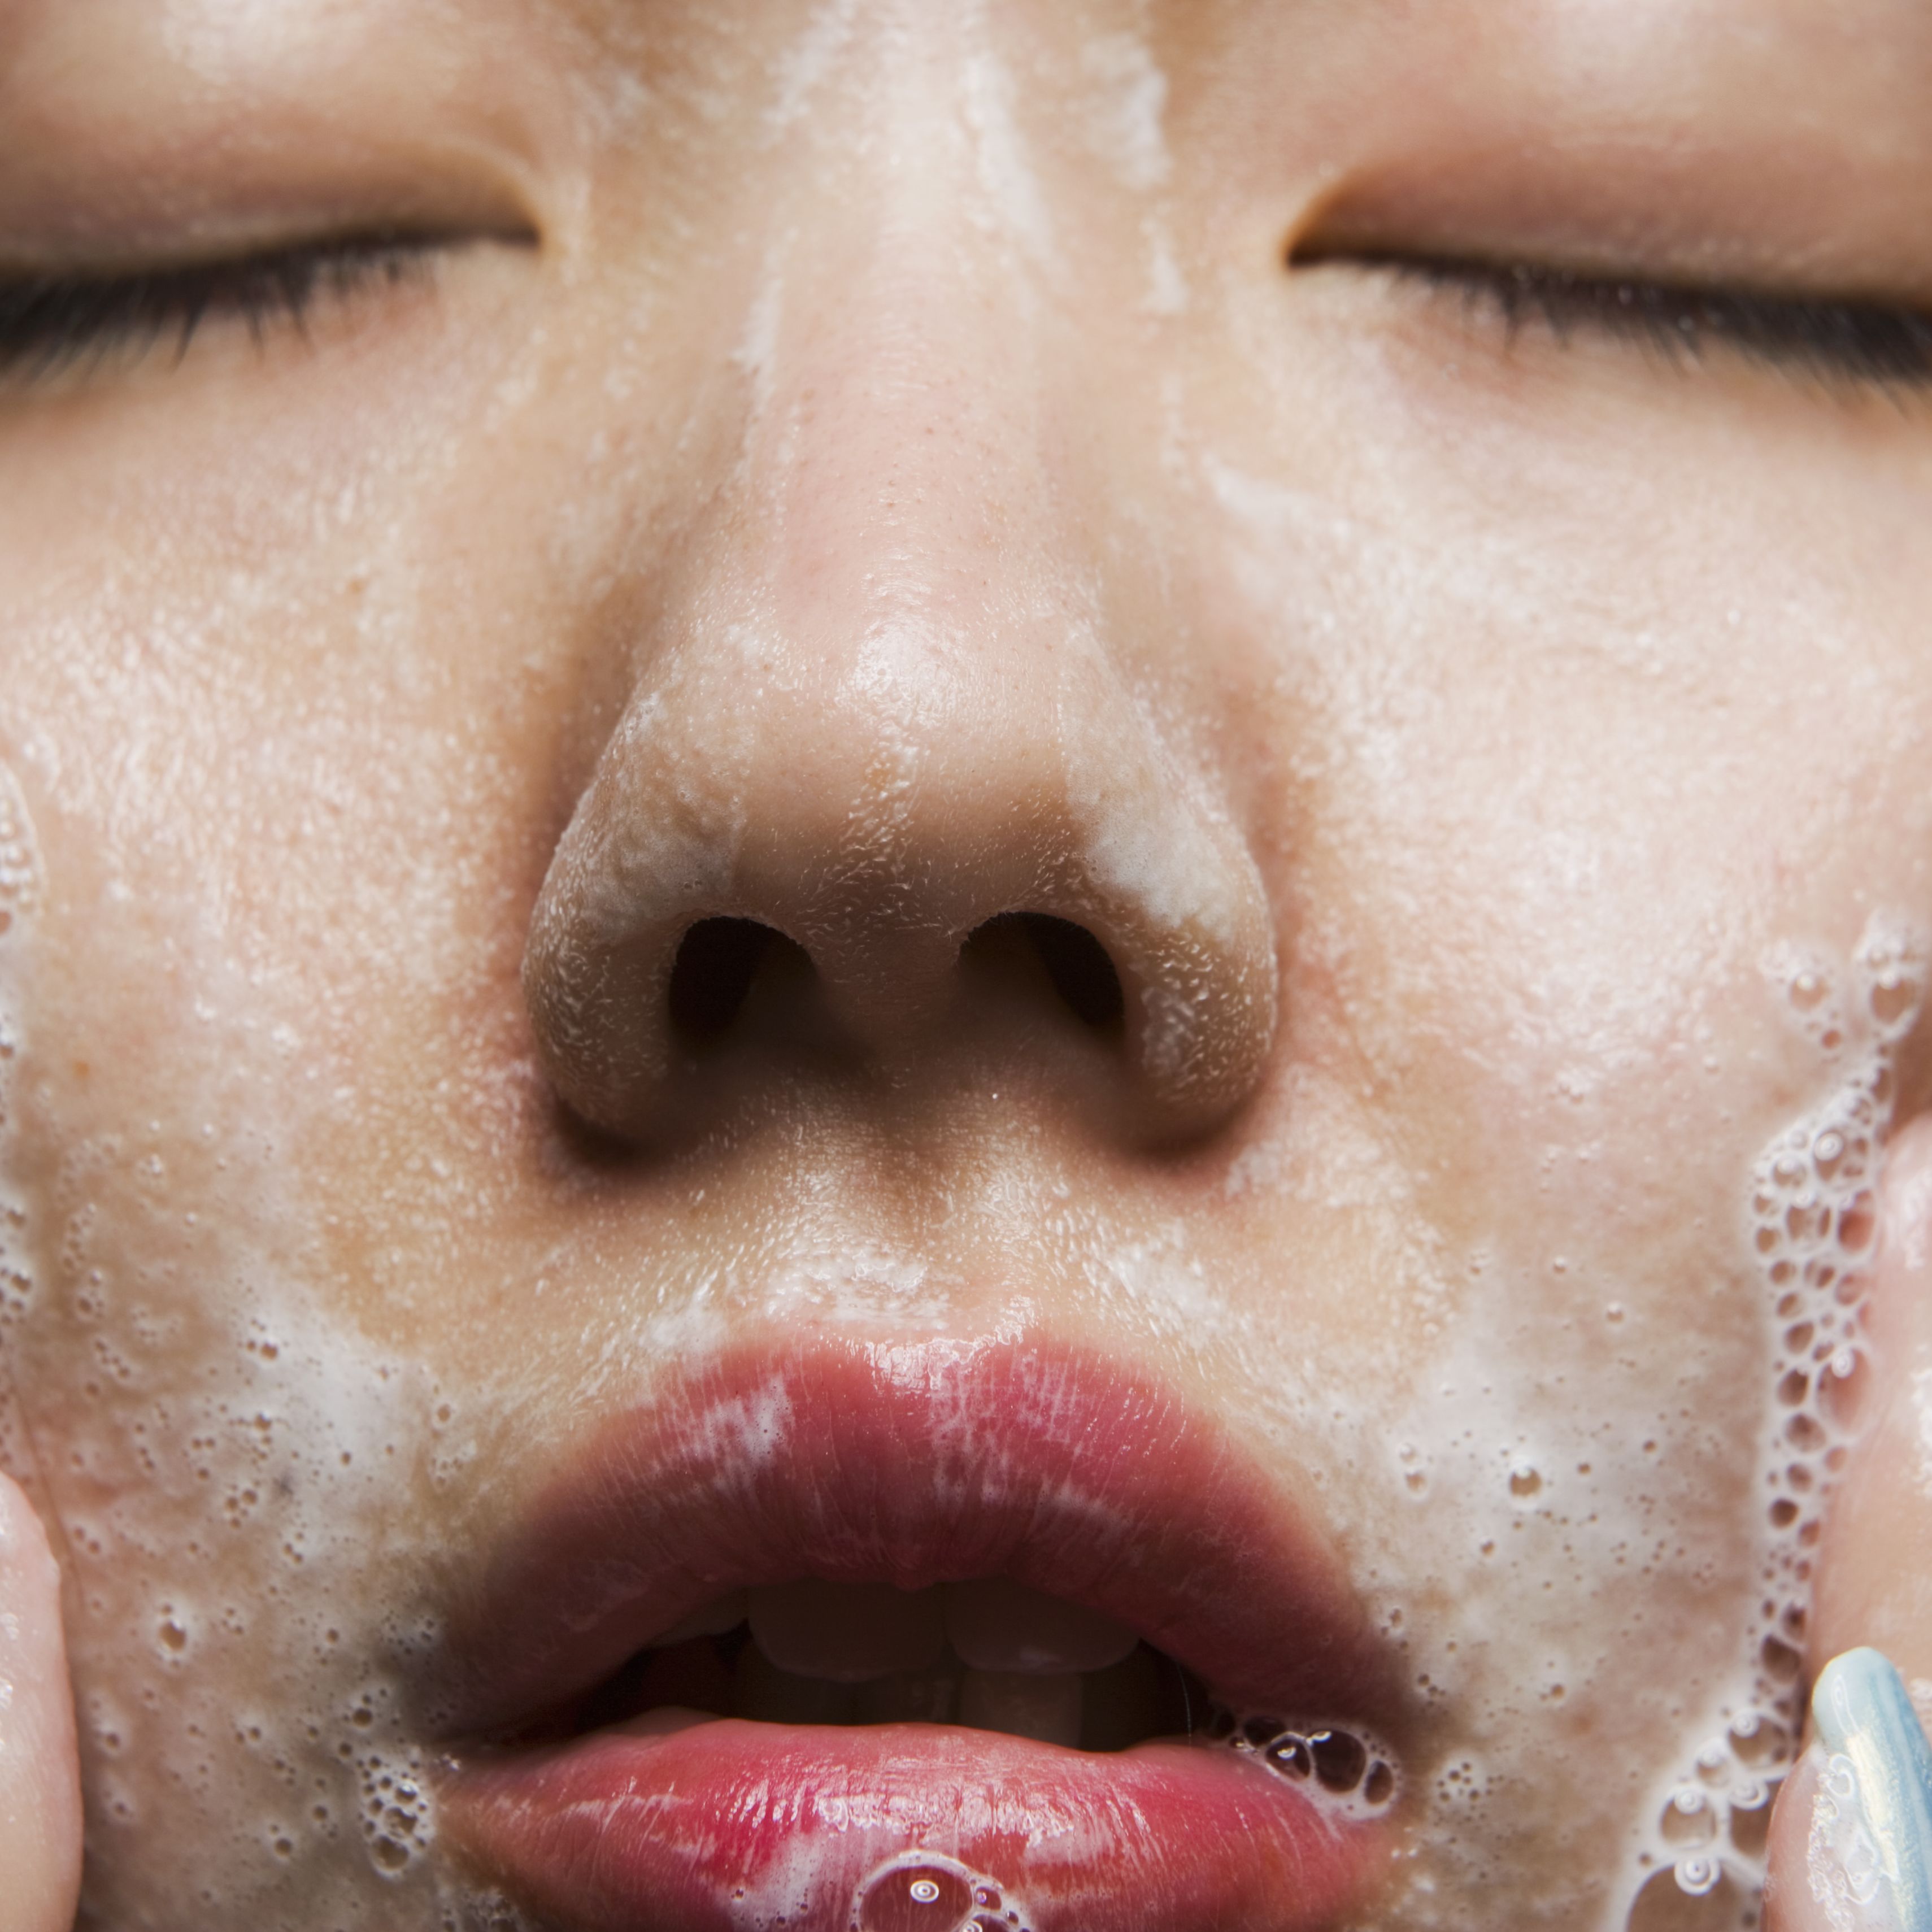 How To Wash Your Face Tips for Facial Cleansing From Experts Marie Claire pic picture